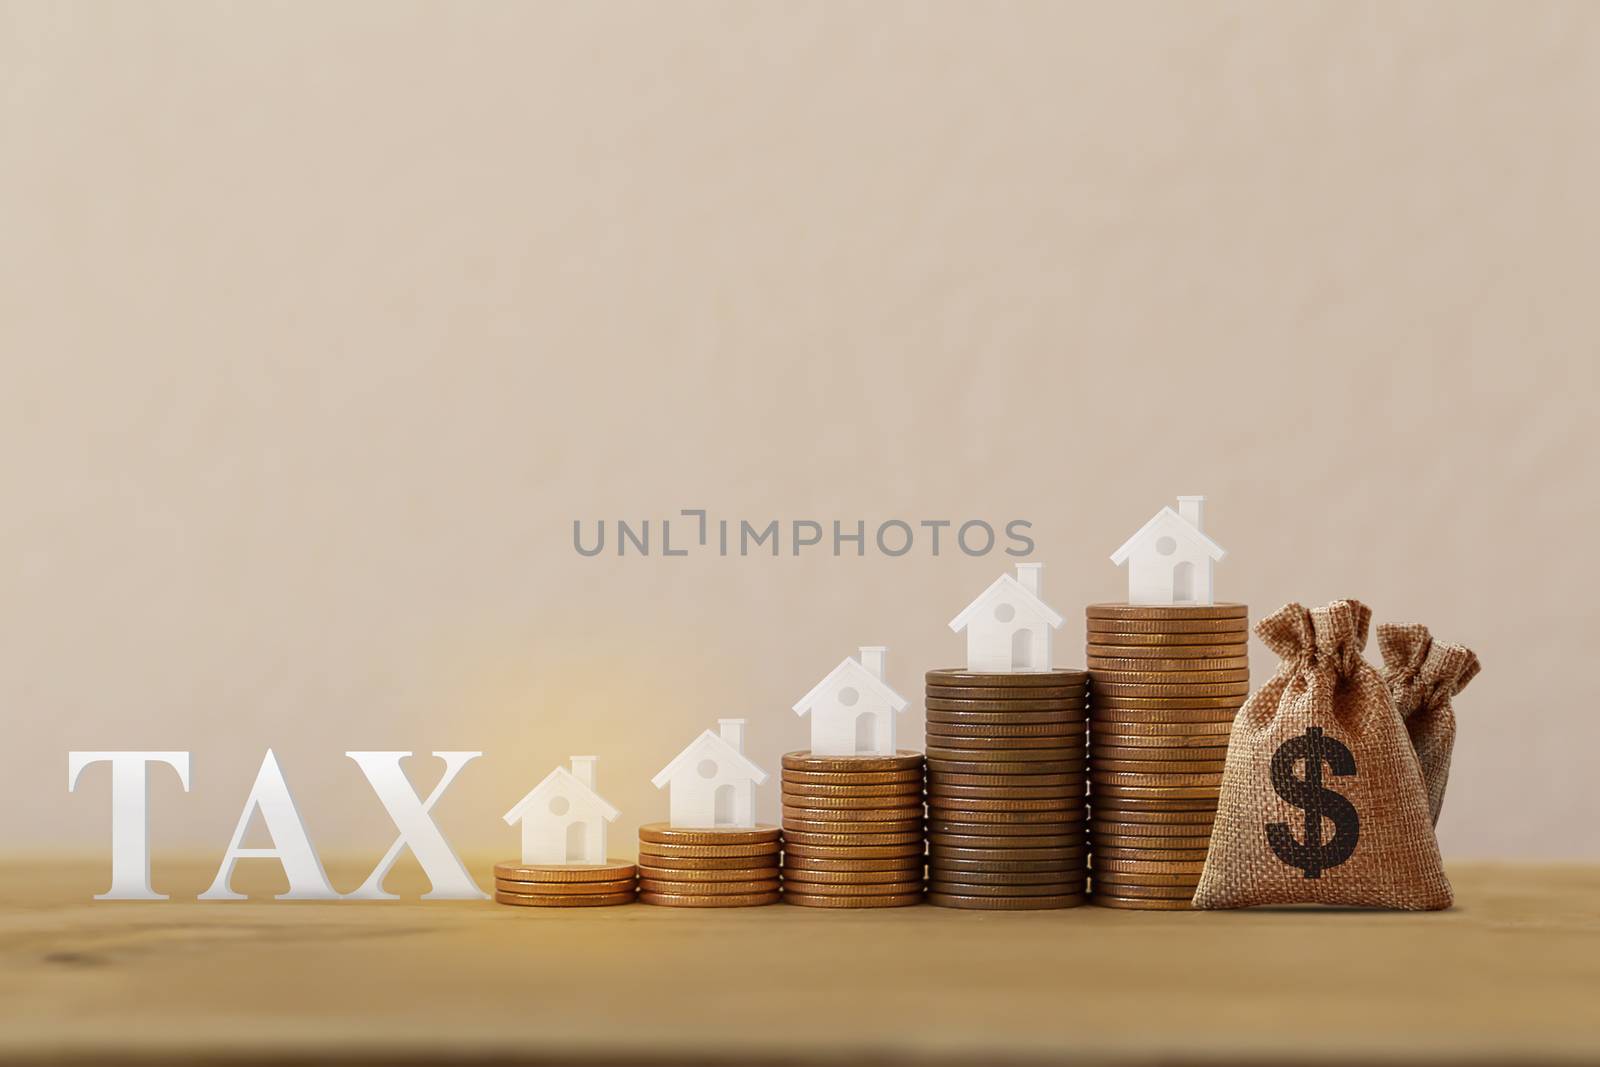 Mini house on rows of rising coins, US dollar bags, word tax on wood table. House or housing, land value, finance tax concept: depicts ad valorem tax on the value of the property all.